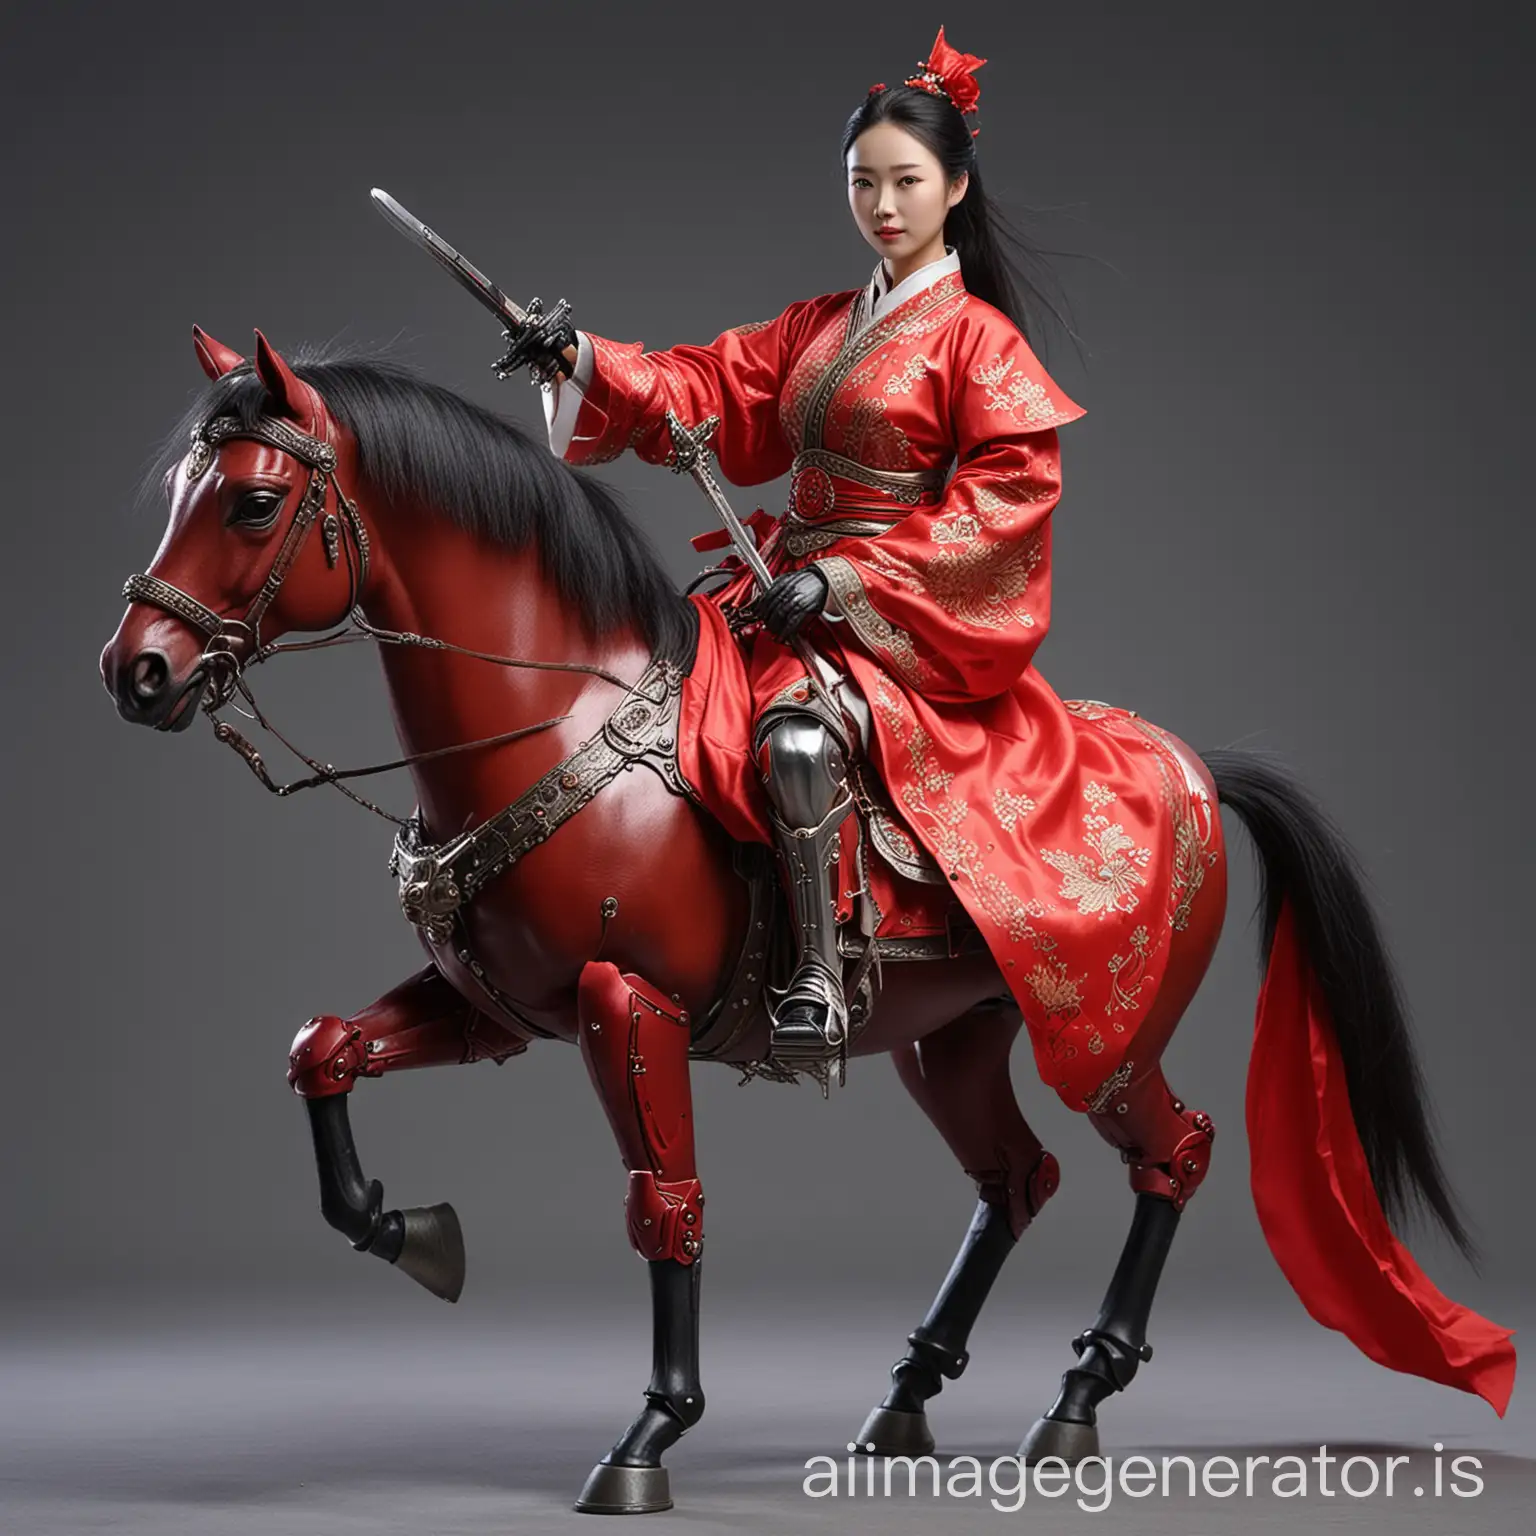 Chinese female robot with red clothes ride horse with sword in hand